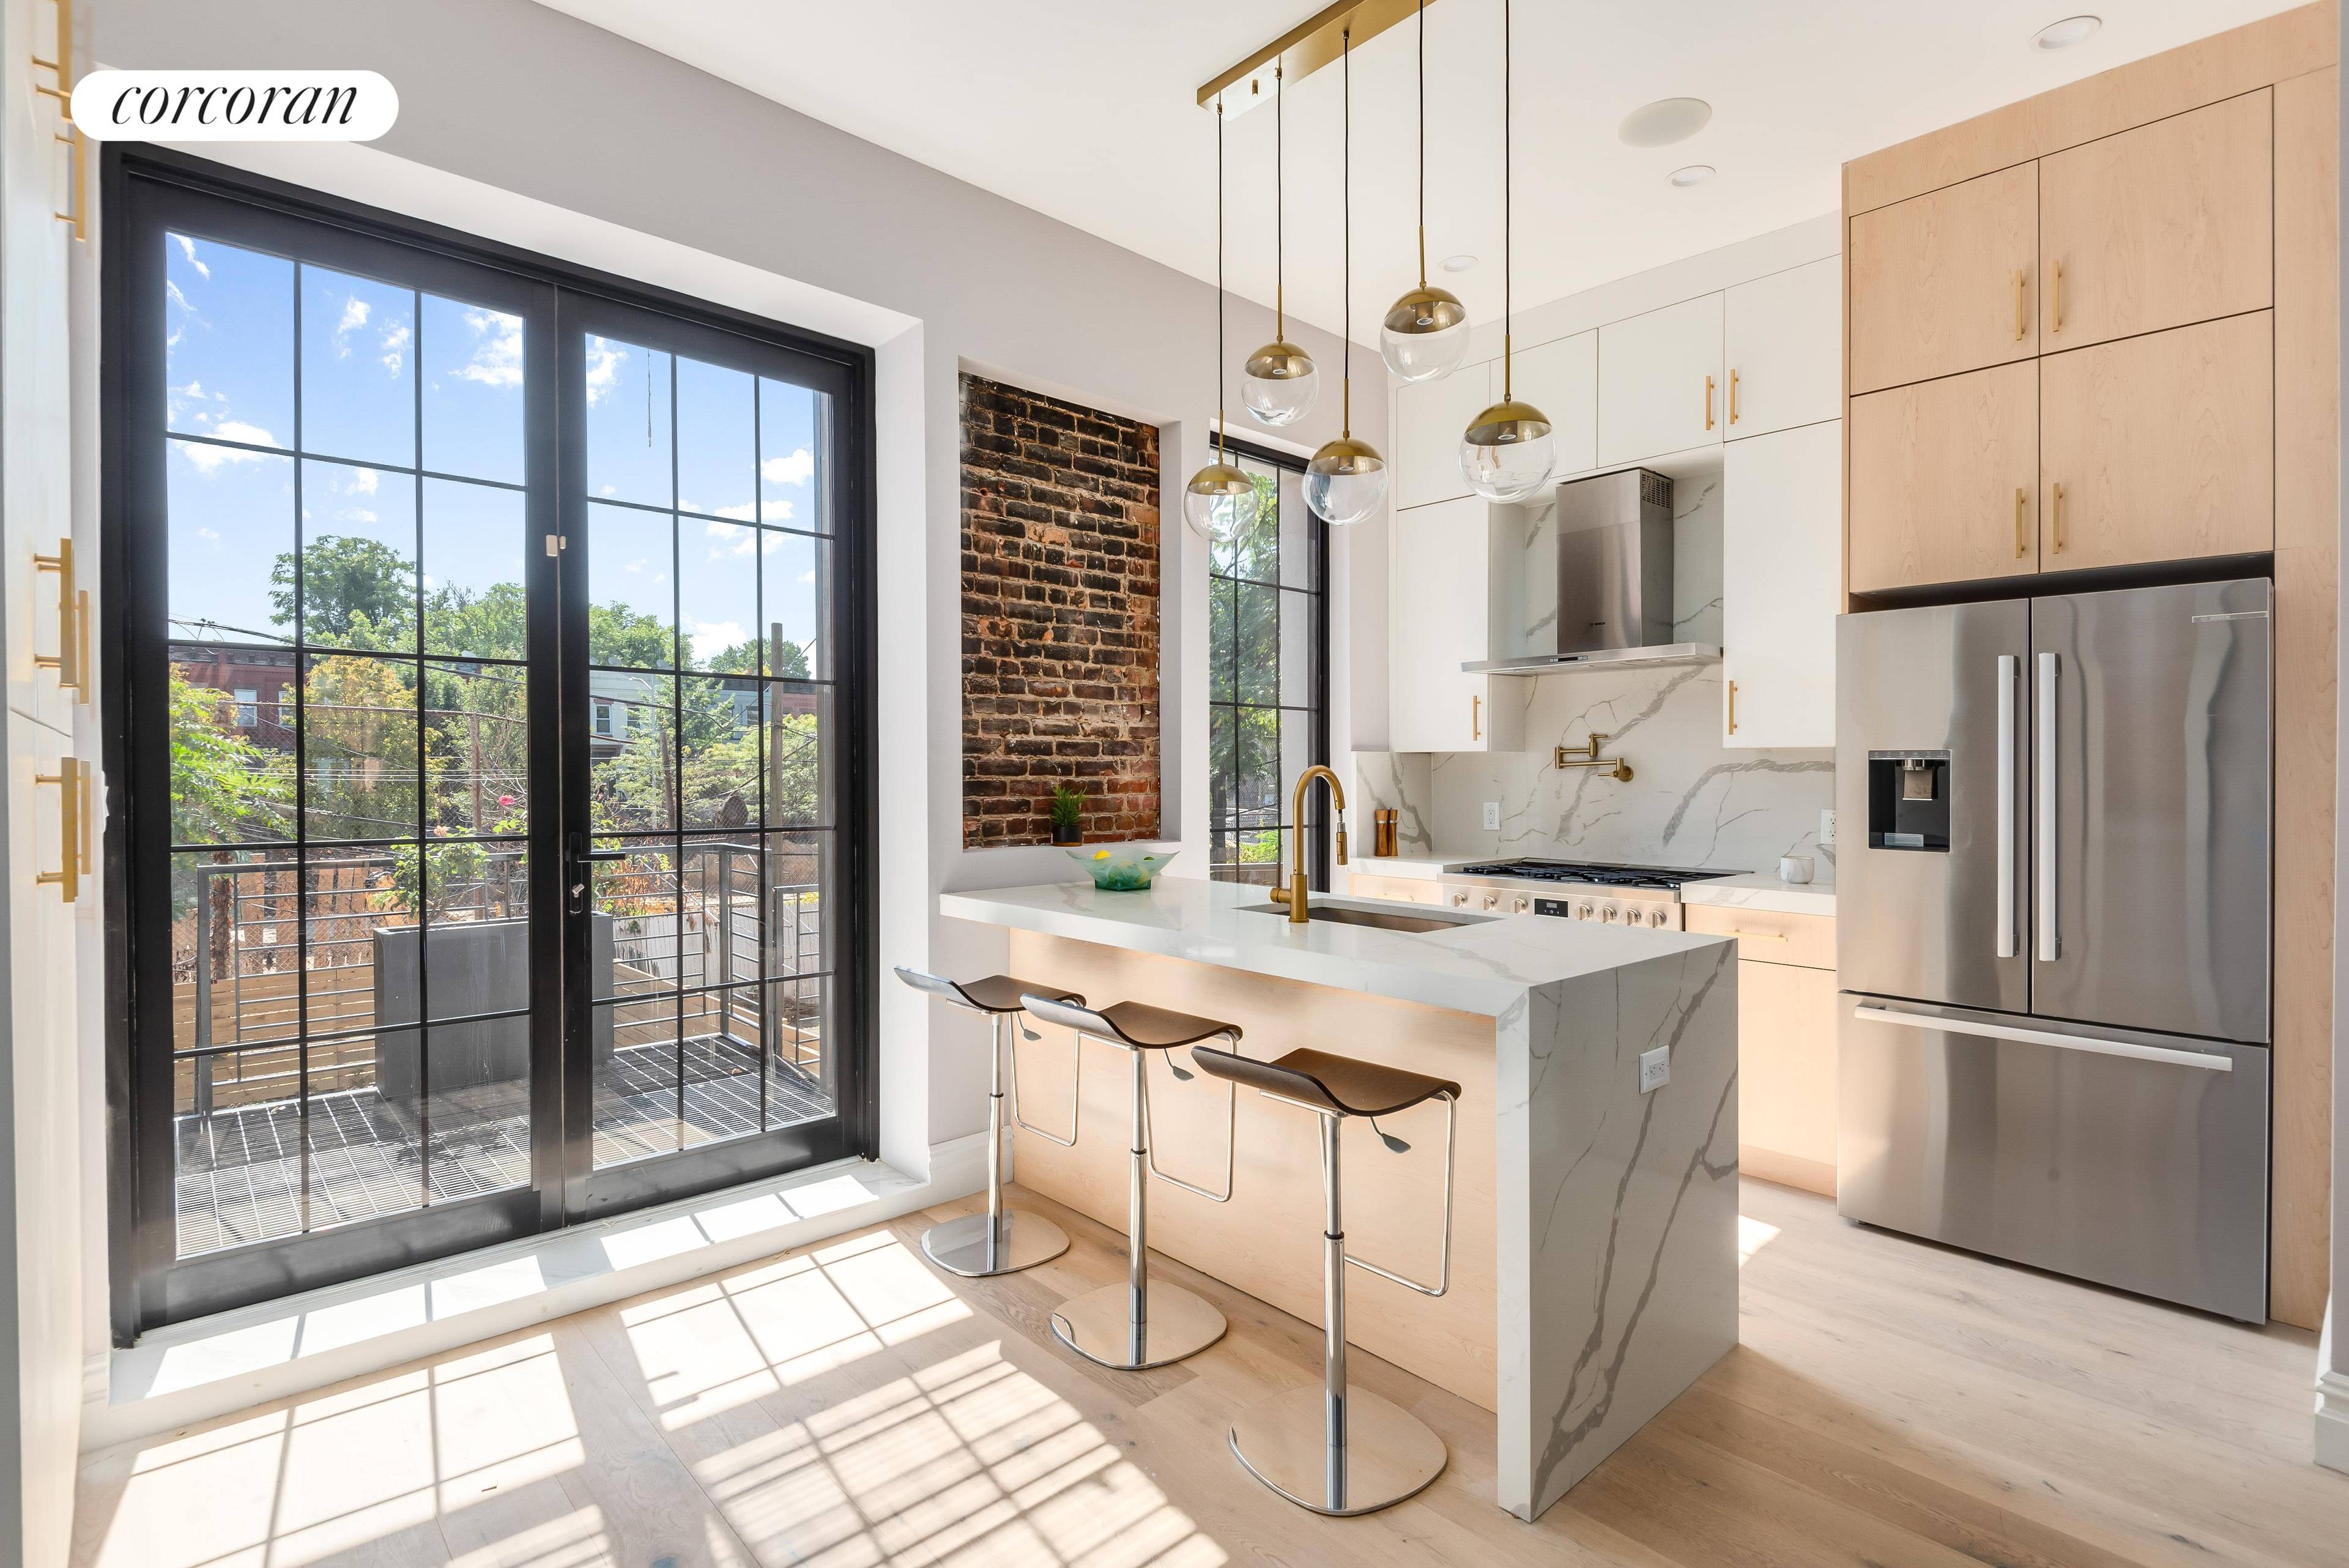 852 Hancock is a newly renovated two family townhouse in the heart of Stuyvesant Heights with taxes of 4, 206 yr and a rental unit that could command approx 3, ...